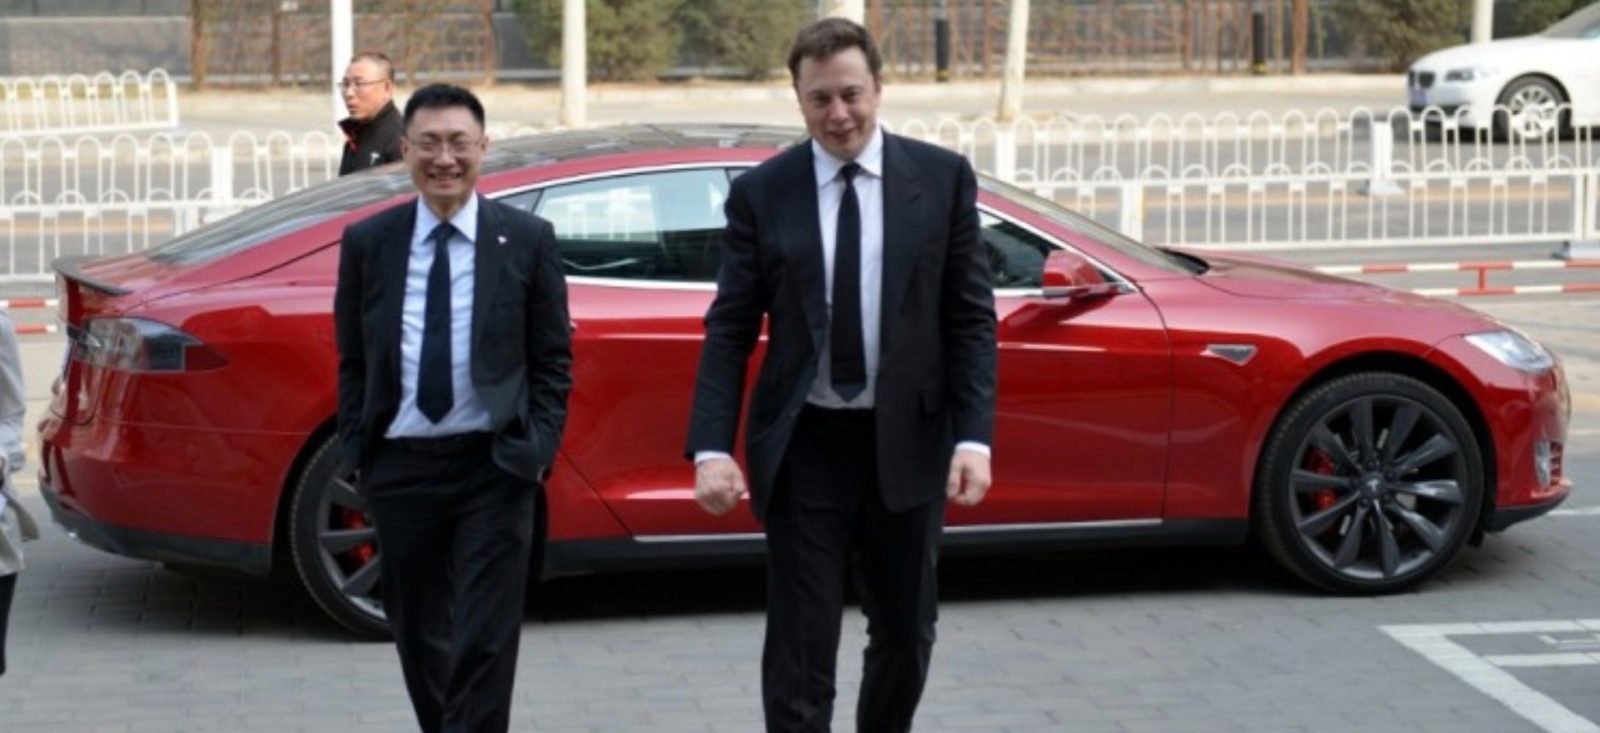 photo of Elon Musk meets with top Biden administration officials over electrification image